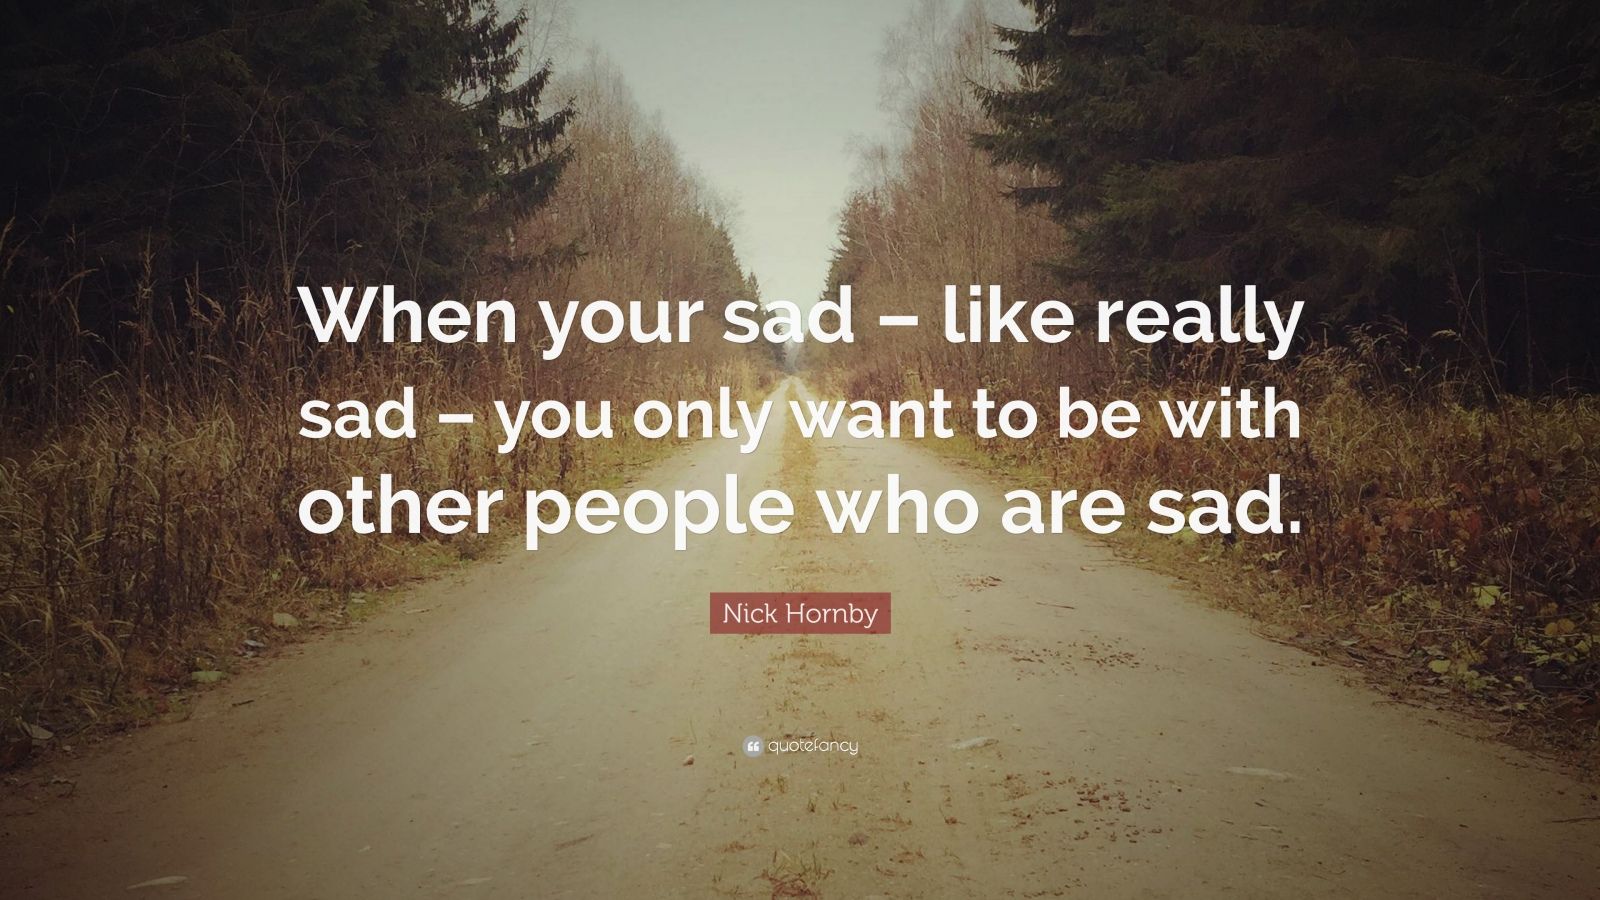 Nick Hornby Quote: “When your sad – like really sad – you only want to